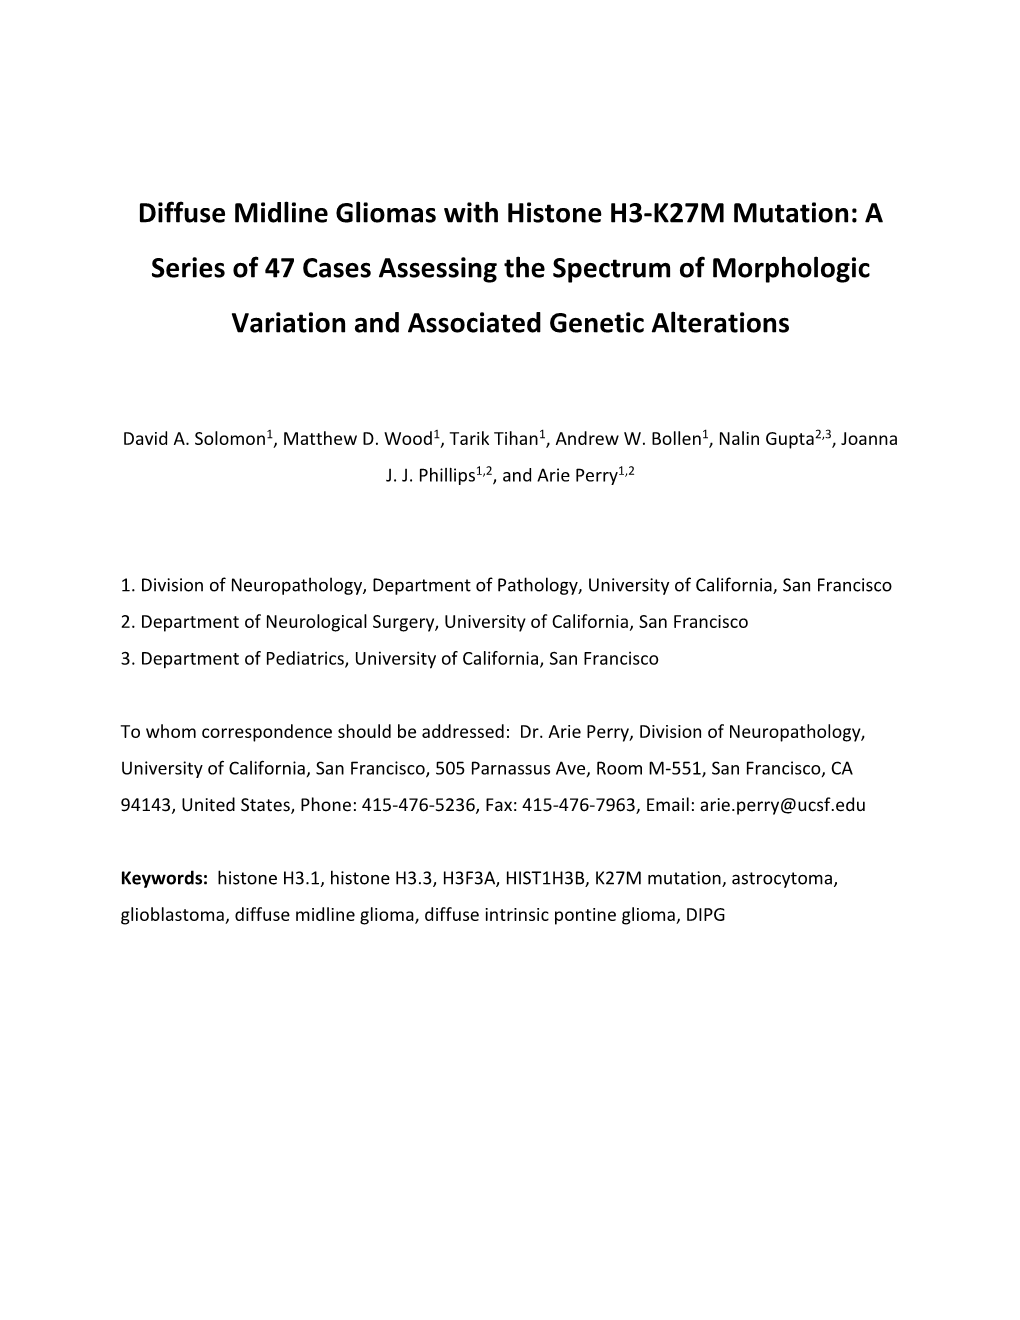 Diffuse Midline Gliomas with Histone H3-K27M Mutation: a Series of 47 Cases Assessing the Spectrum of Morphologic Variation and Associated Genetic Alterations